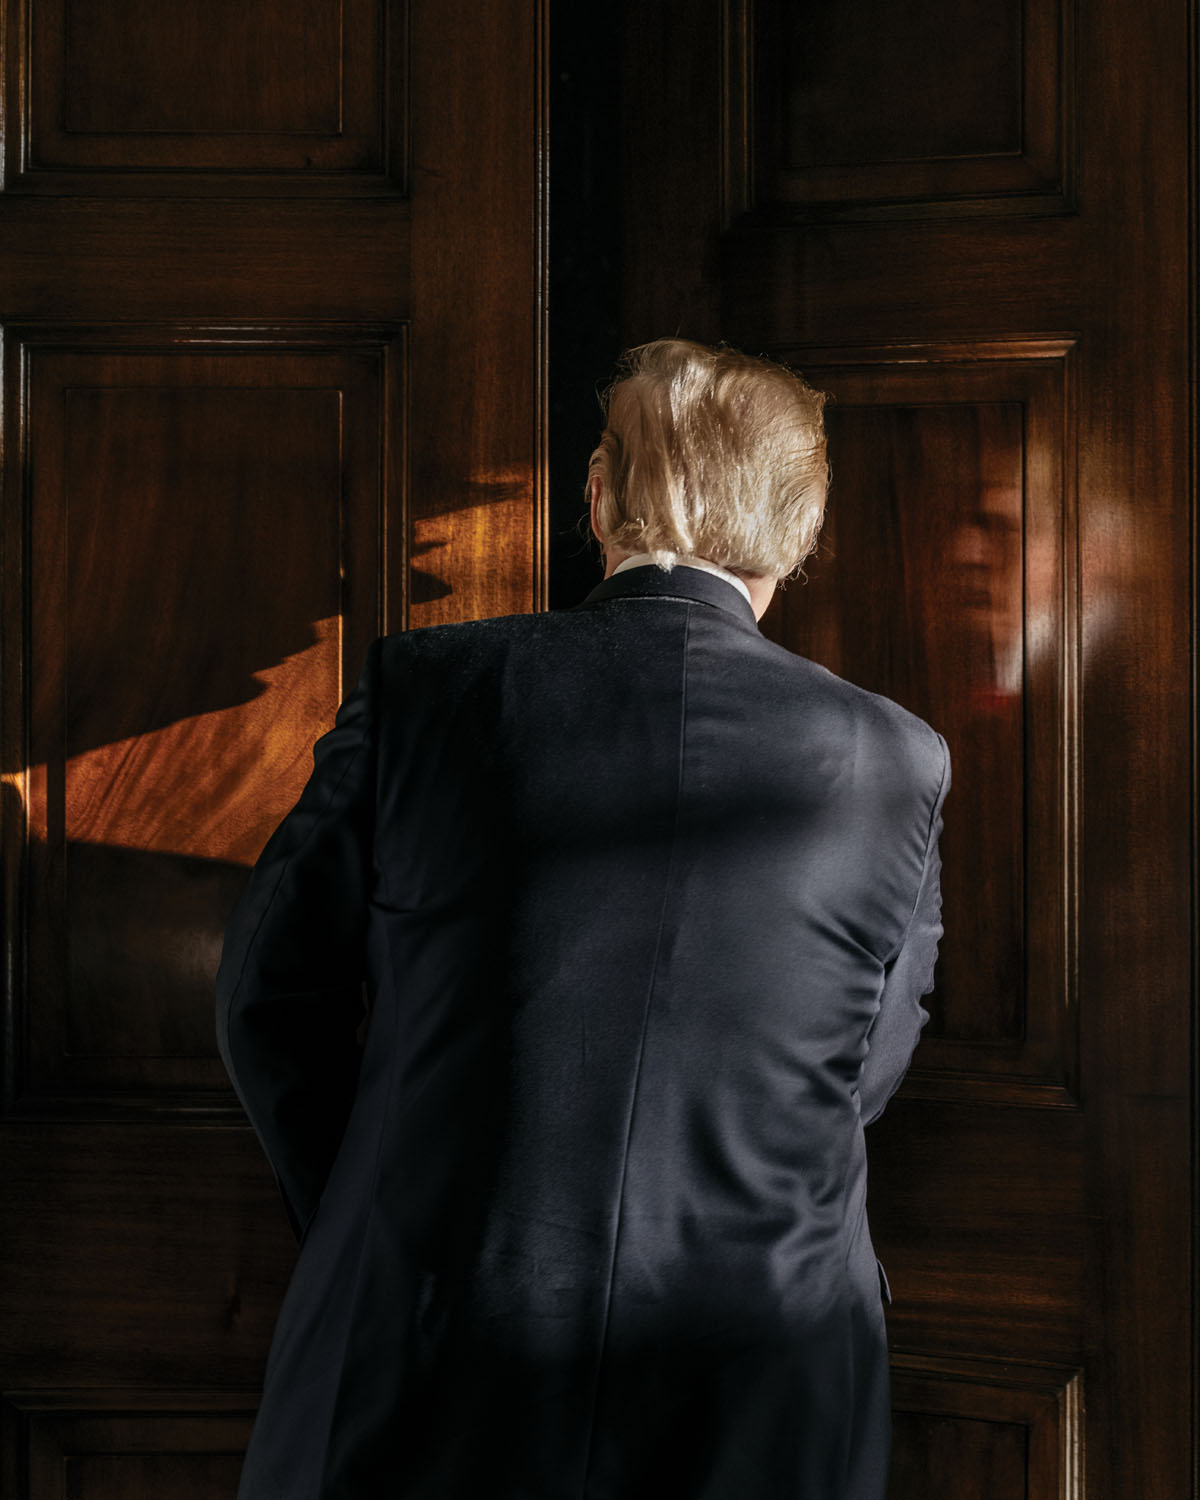 President Donald J. Trump entering his living room in the White House Residence. Photograph by Ben Rasmussen.